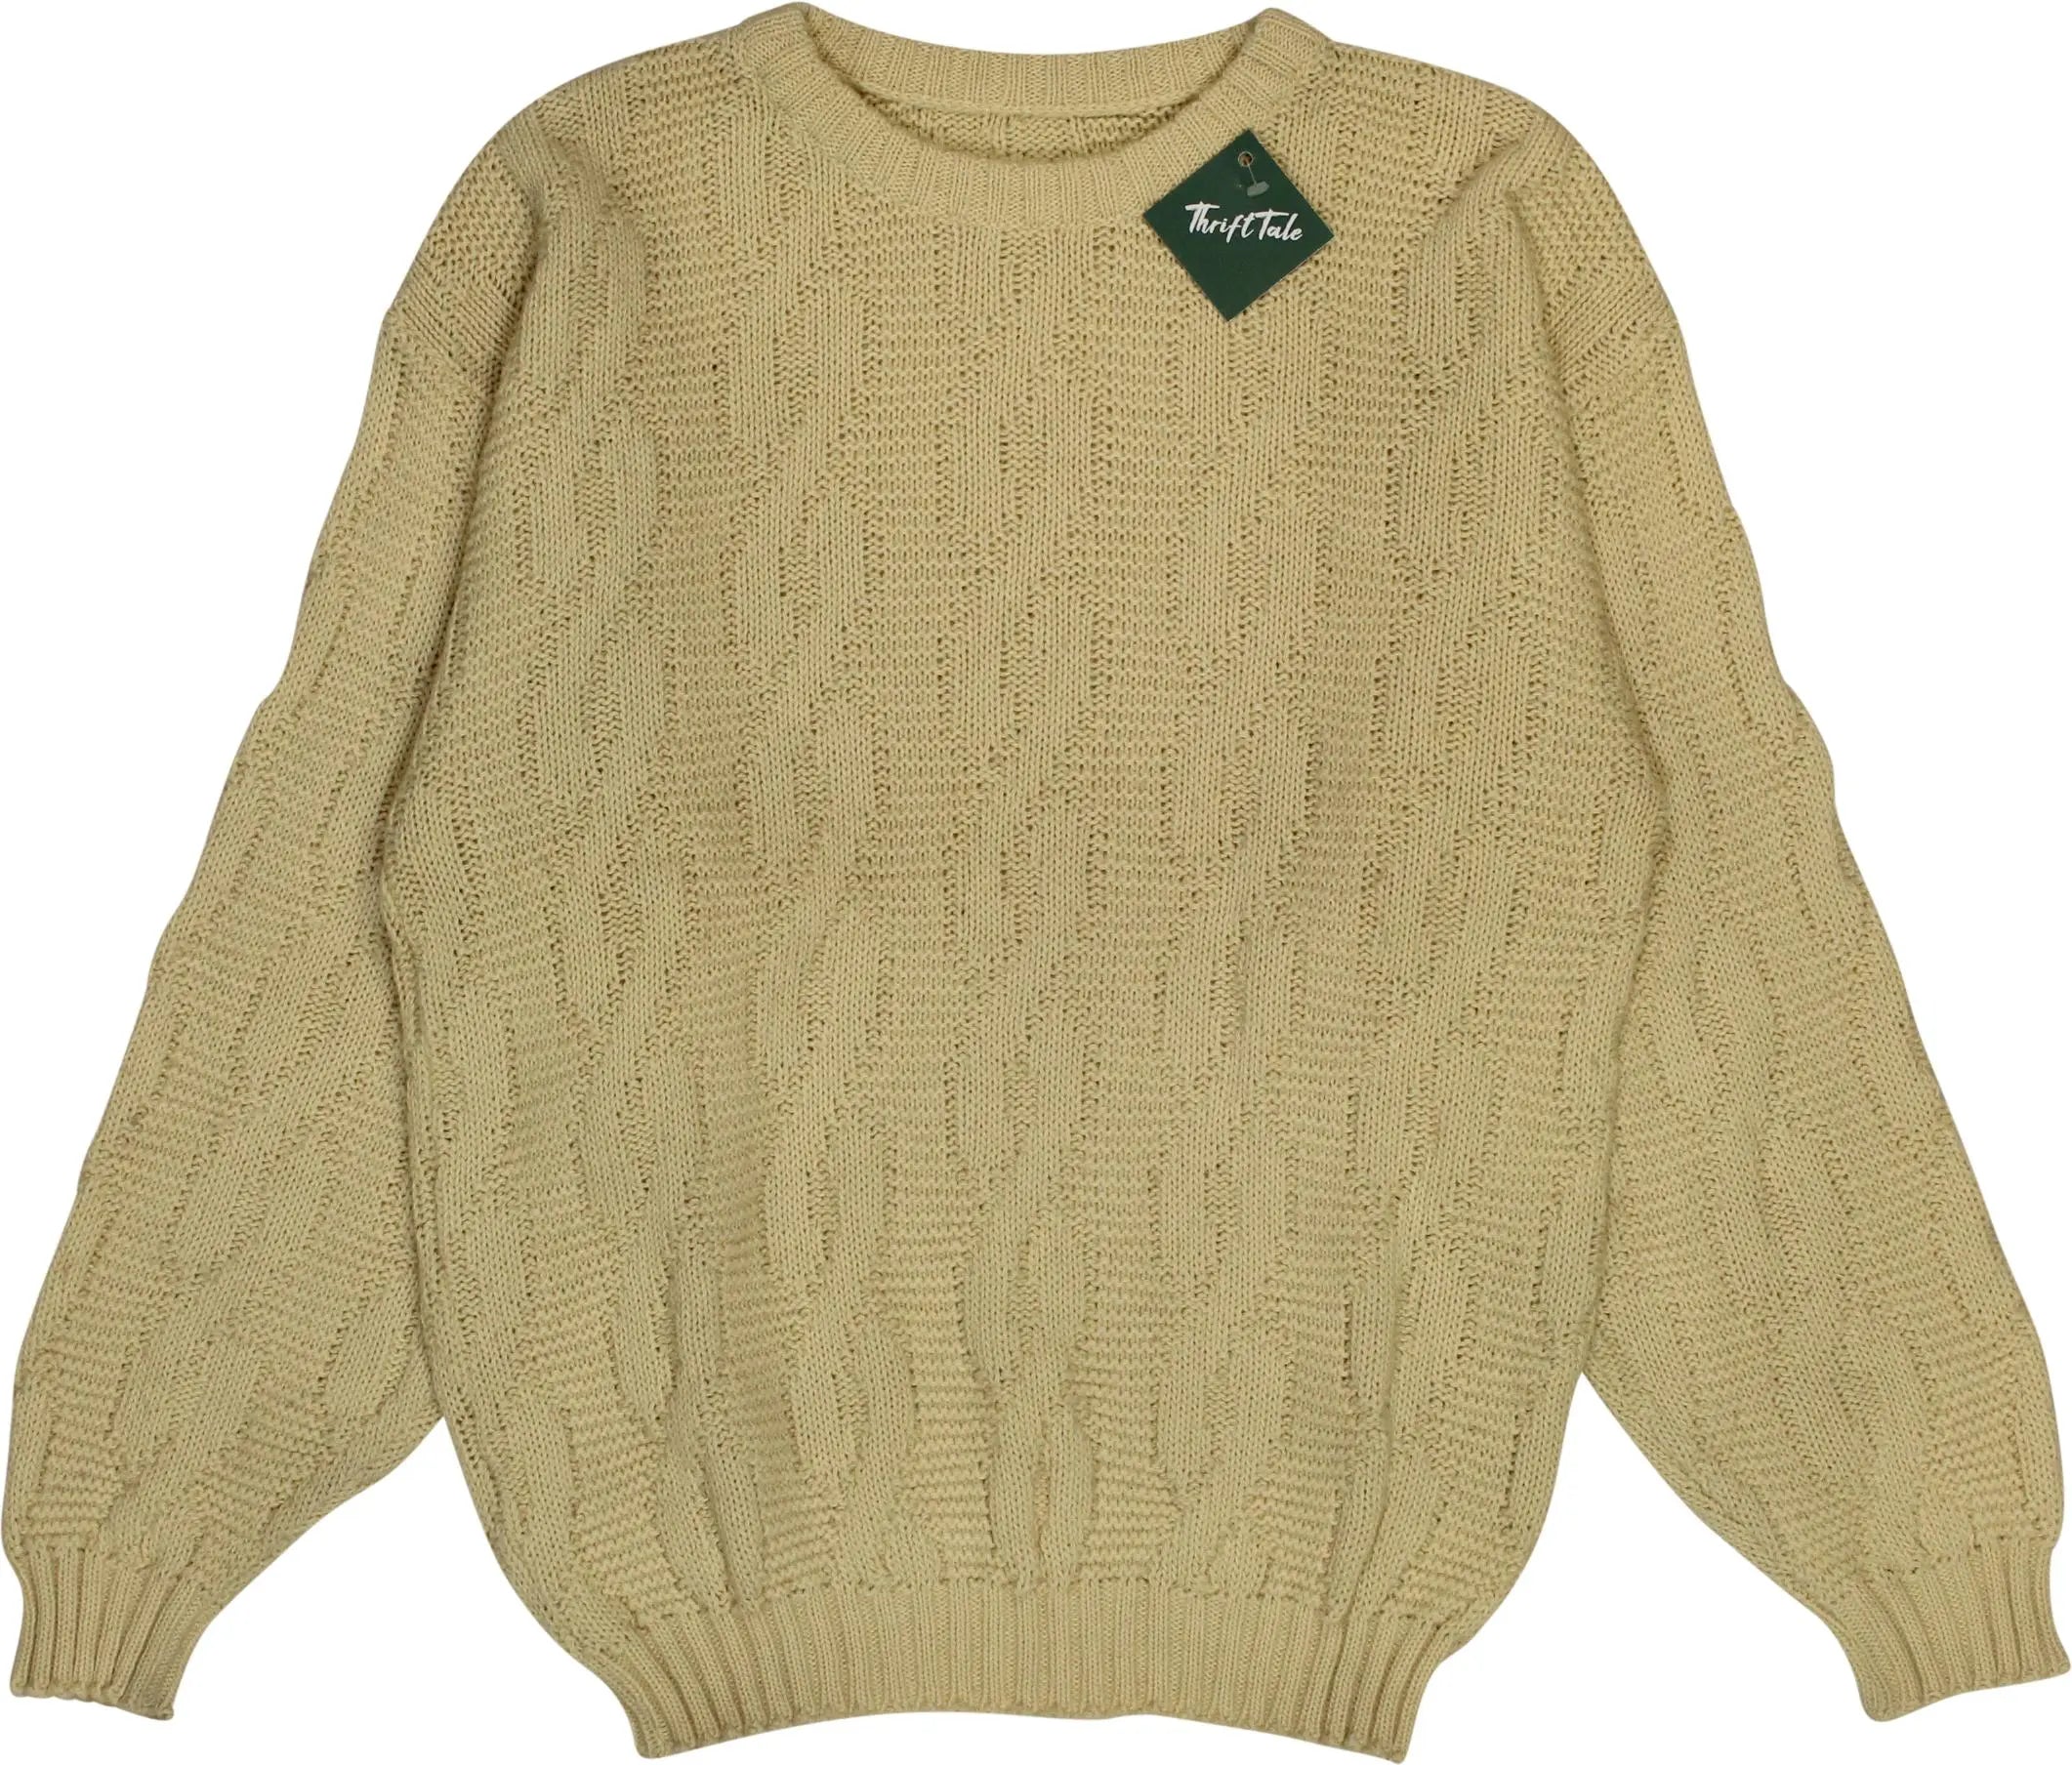 Unknown - Cream Jumper- ThriftTale.com - Vintage and second handclothing